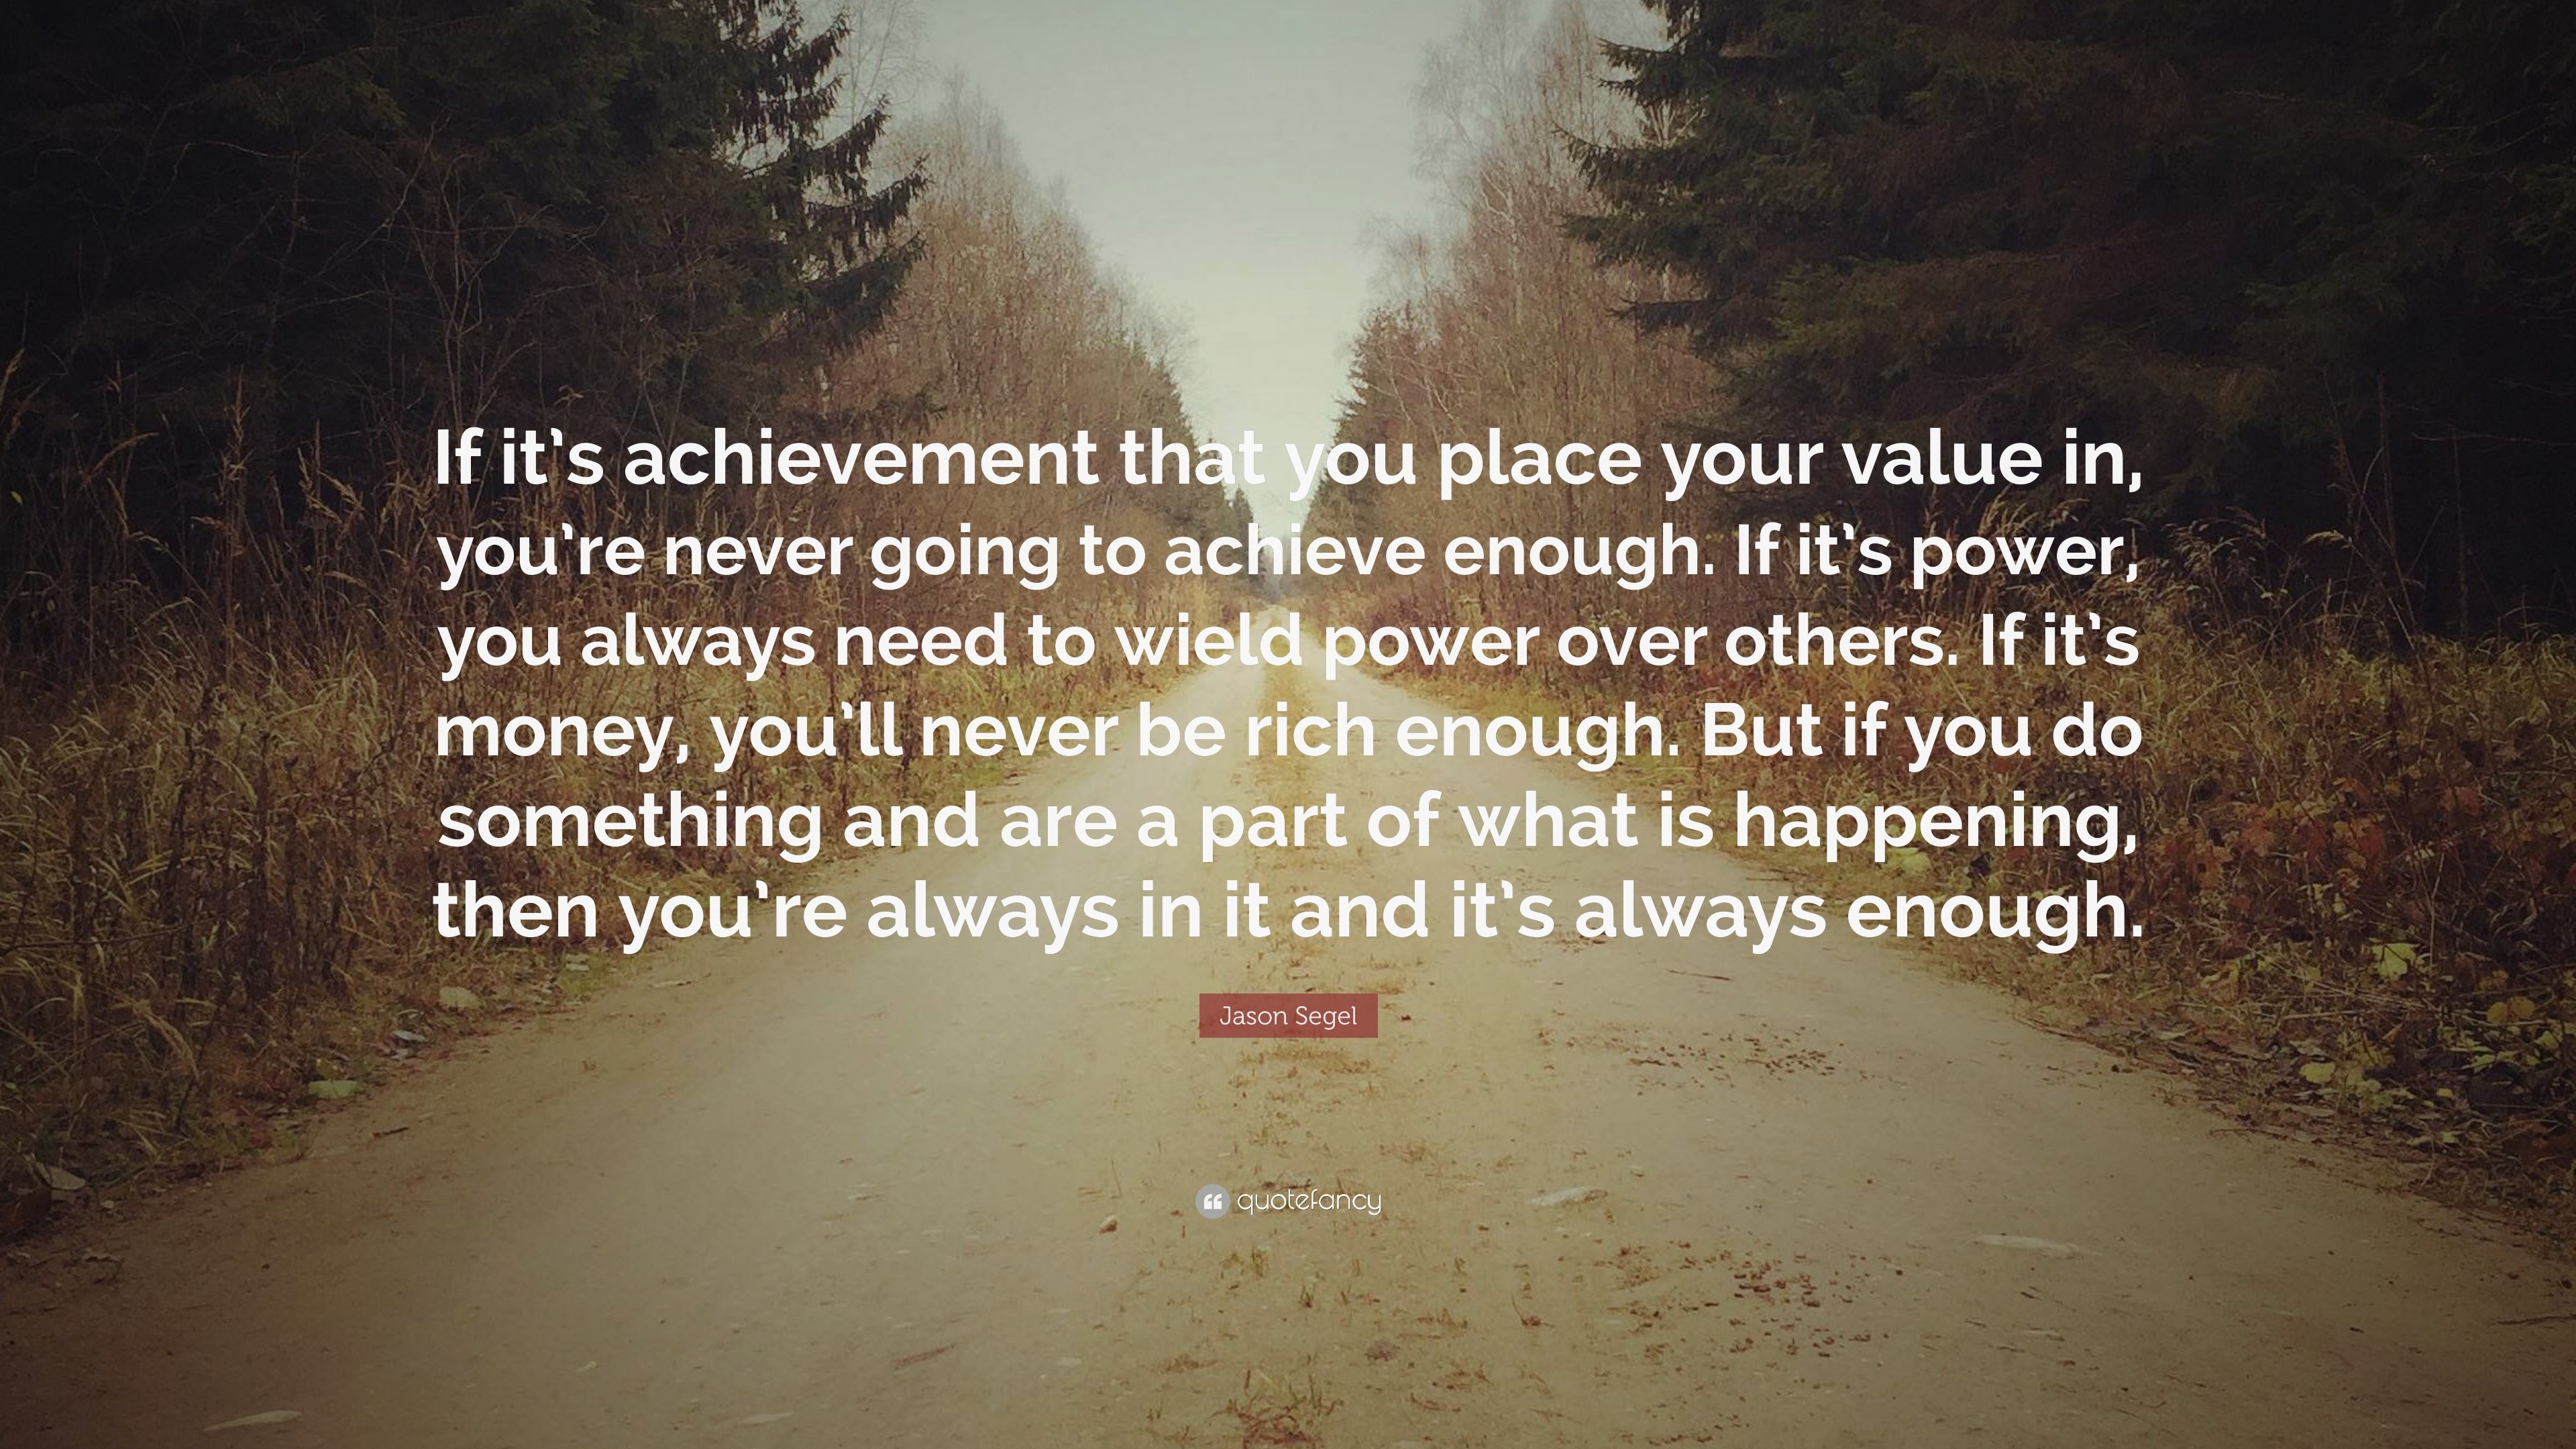 Jason Segel Quote: “If it’s achievement that you place your value in ...